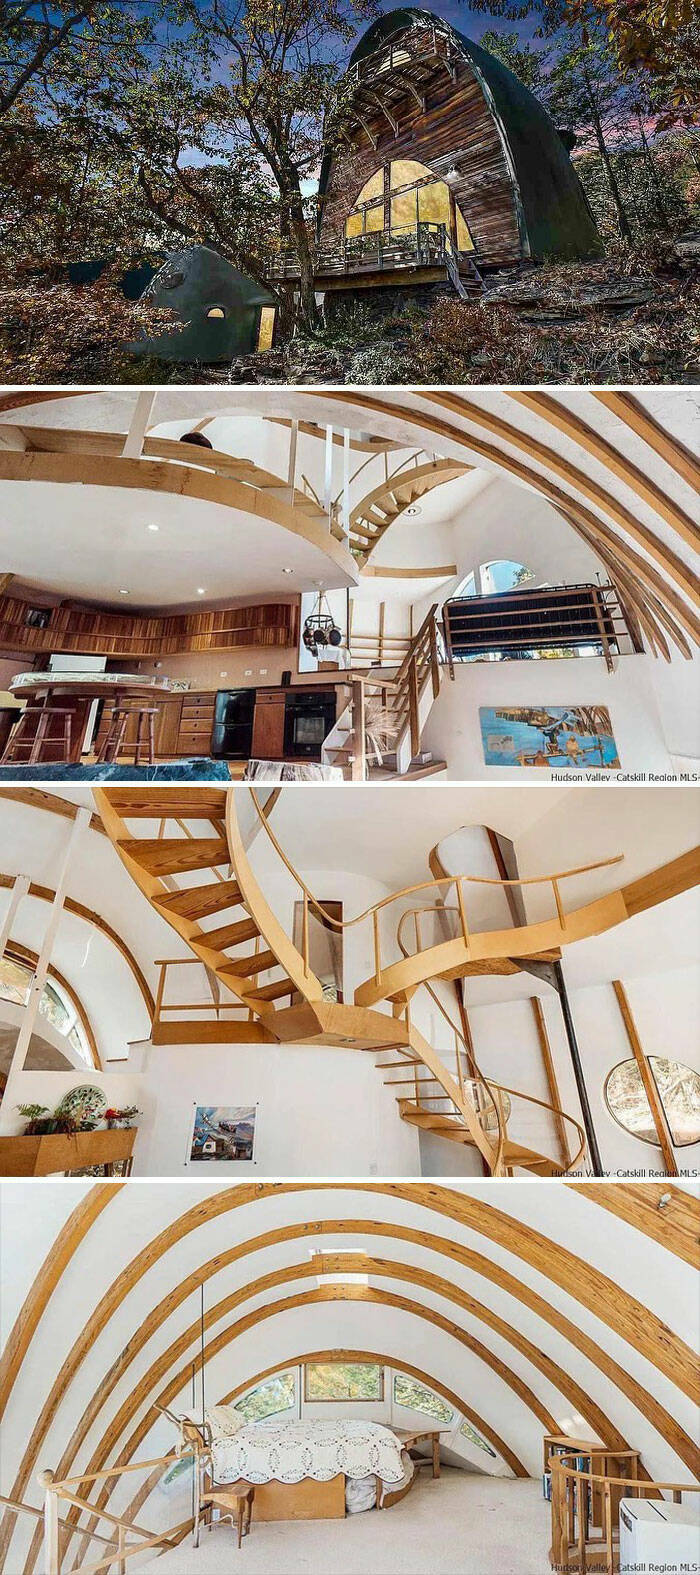 These Are Some Crazy Houses!